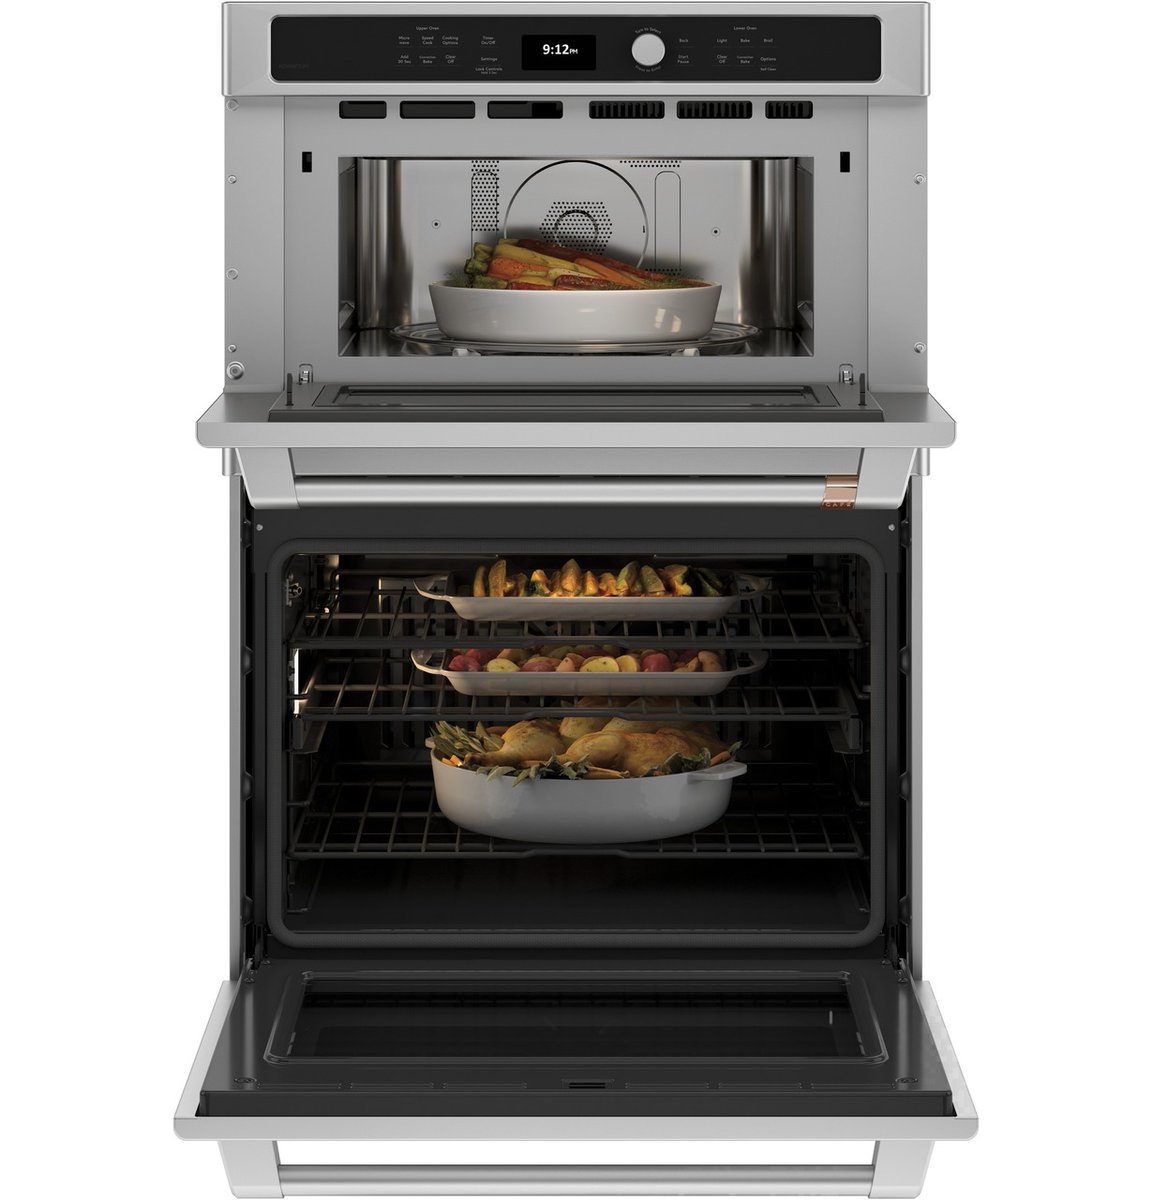 Achieve a whole new level of cooking flexibility thanks to the unmatched versatility of a 30” Combination Double Wall Oven with True Convection and a Five-in-One Oven with Advantium Technology. 

#soudertonpa #kitchendesign #cooking